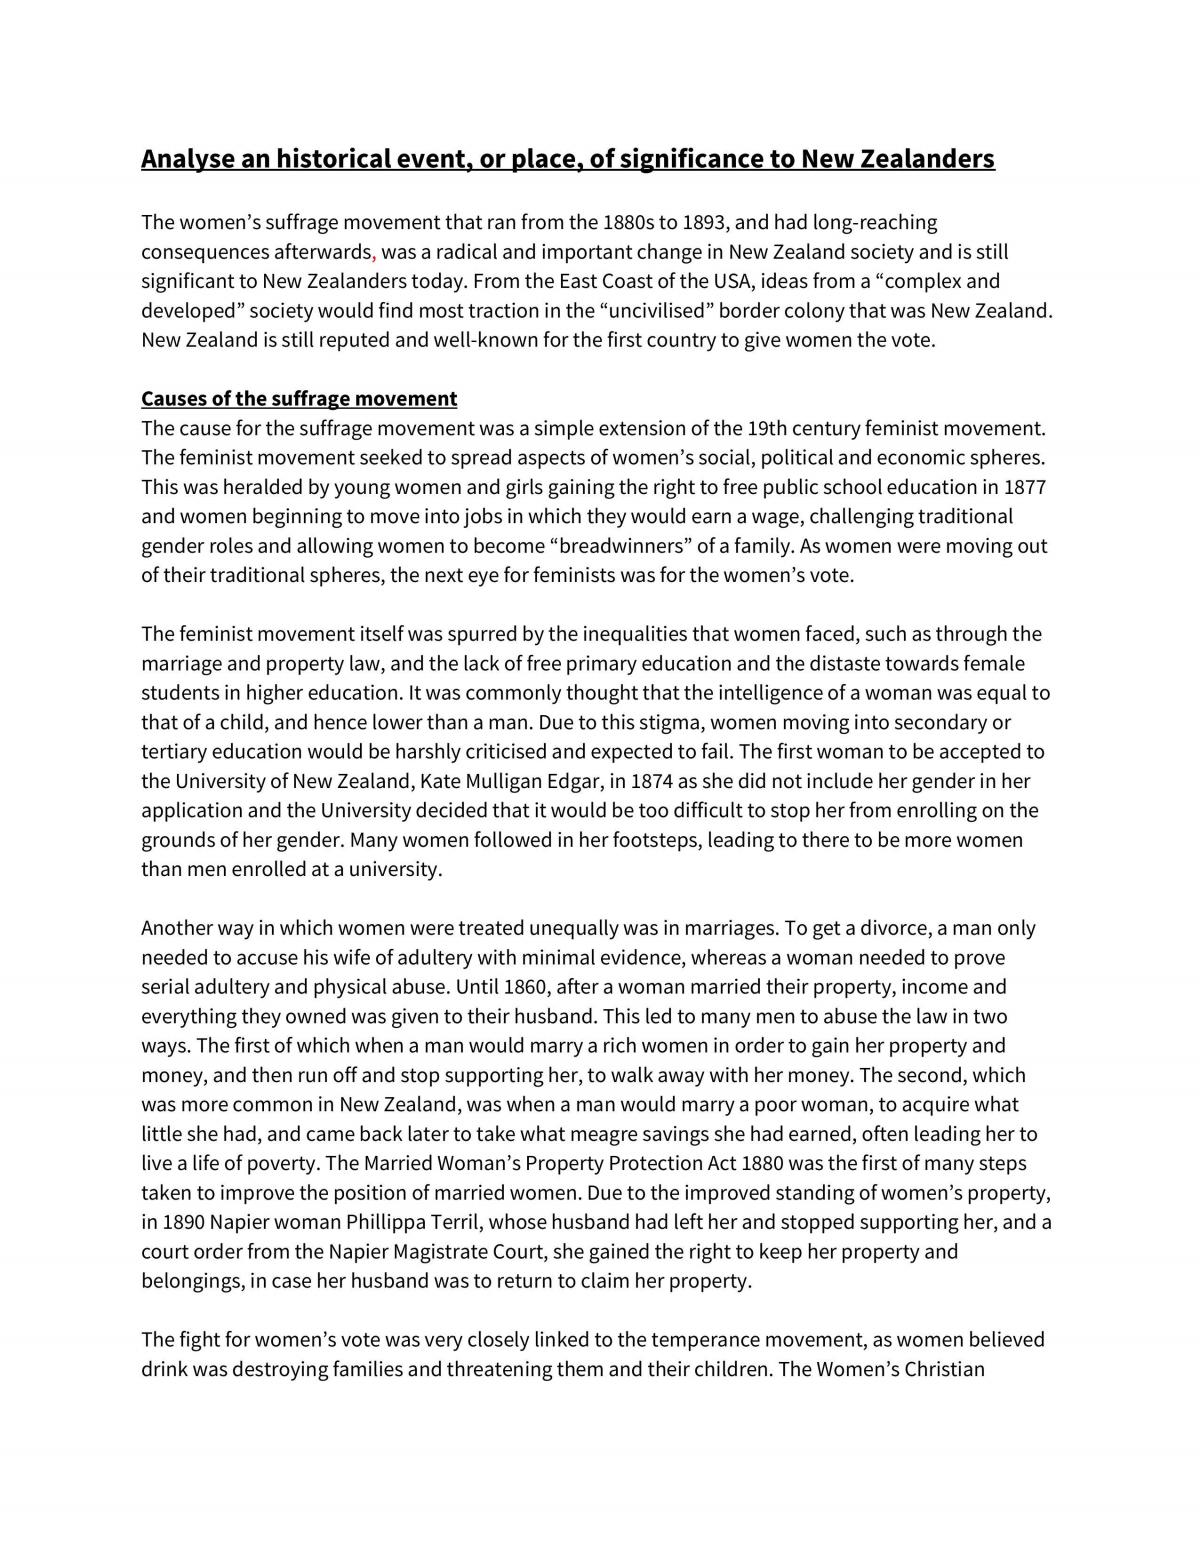 Essay discussing the Women's Suffragette Movement in NZ - Page 1